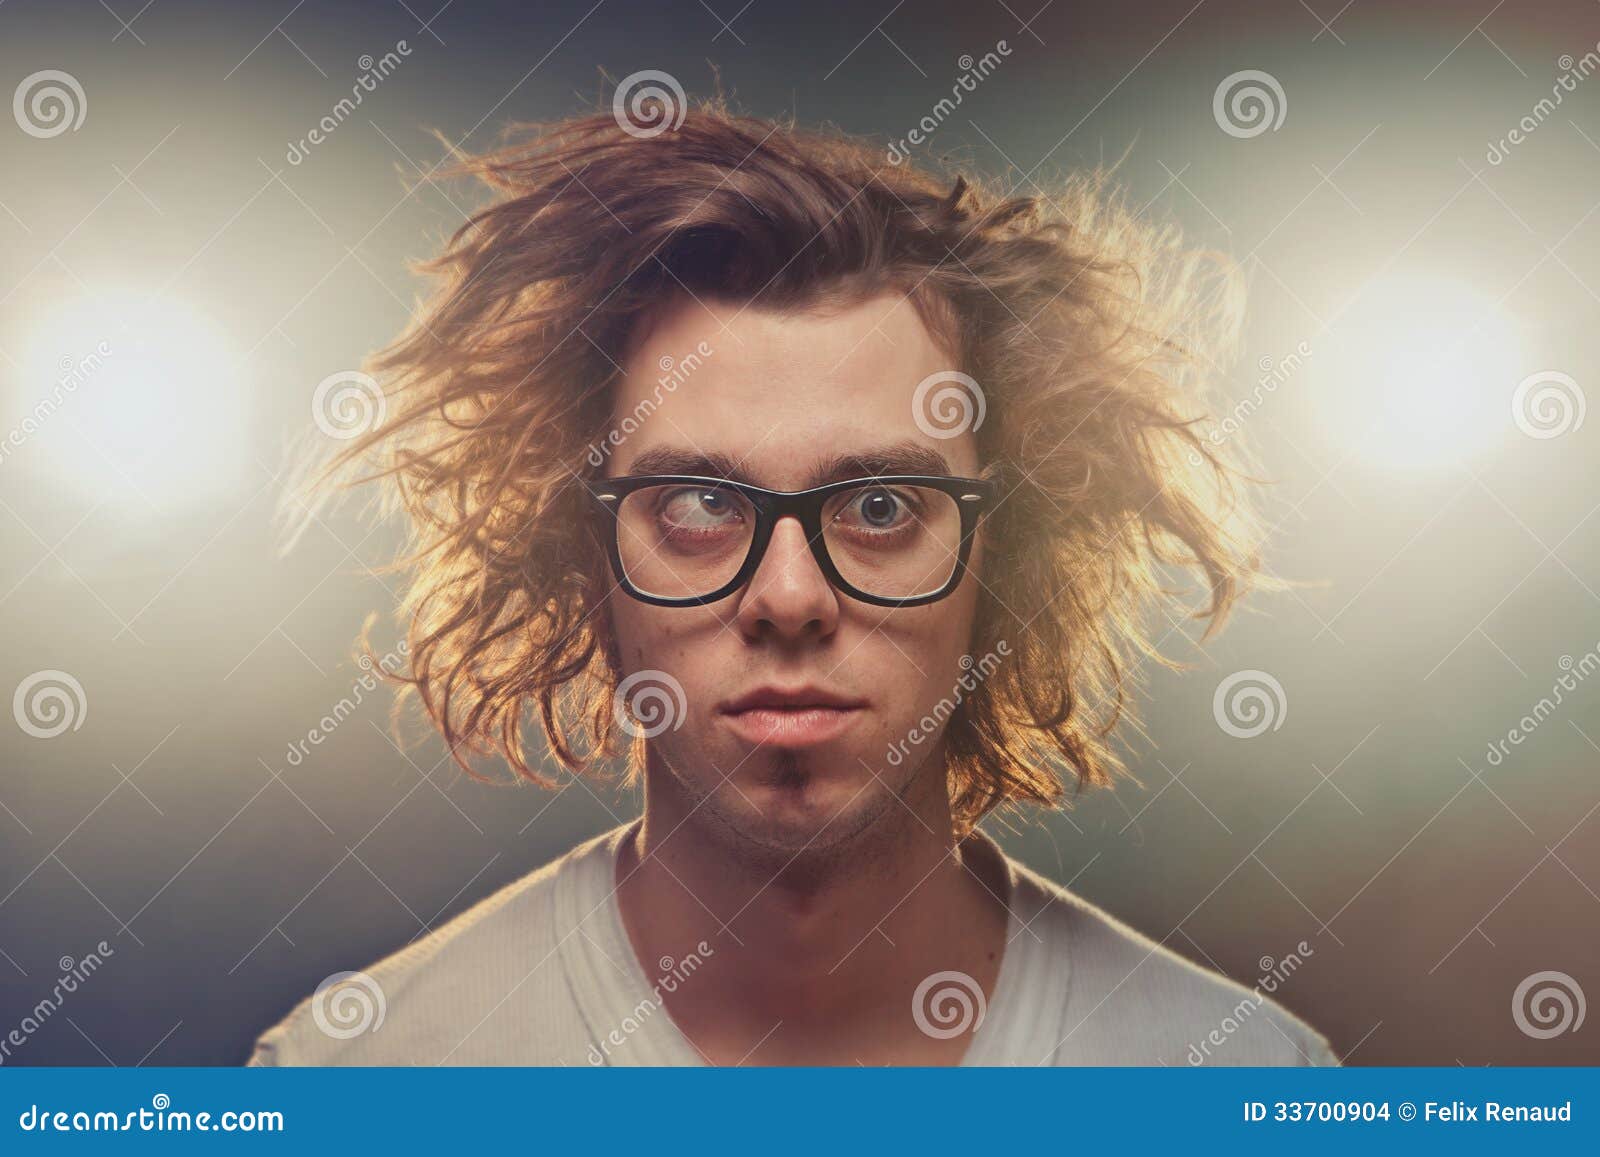 funny squinting man with tousled brown hair in studio